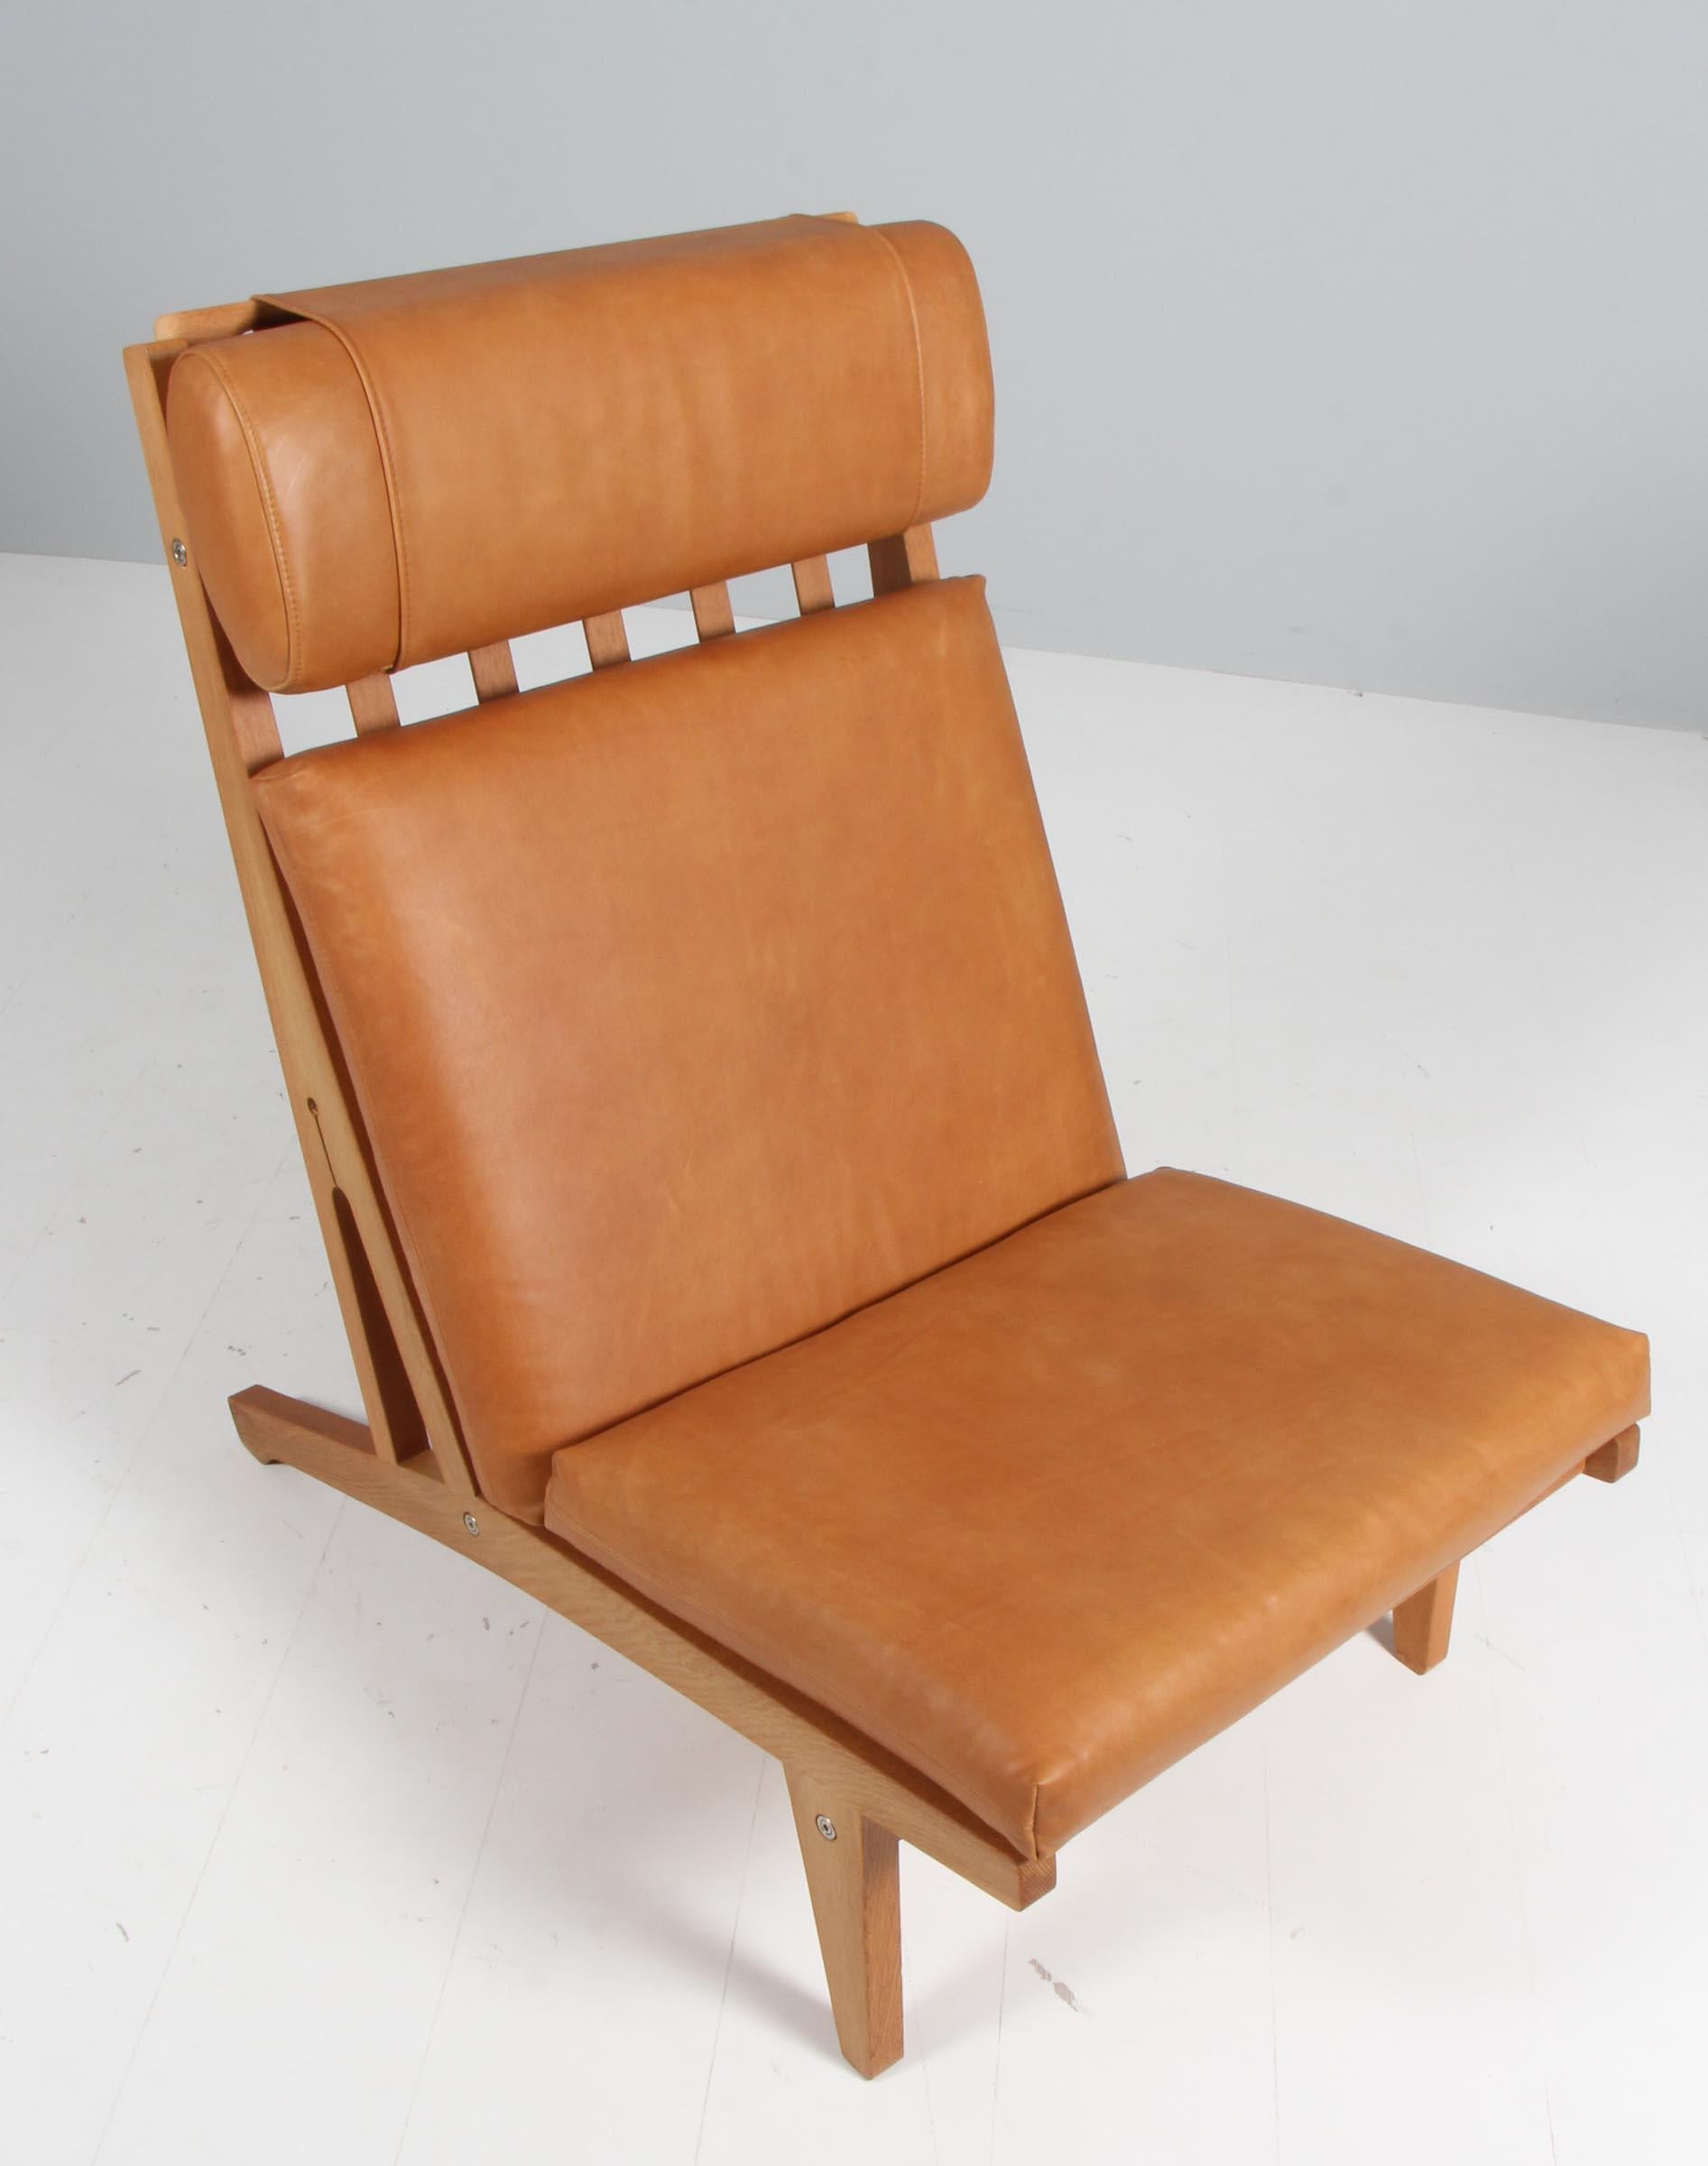 Hans J. Wegner lounge chair with loose cushions new upholstered with vintage cognac full grain aniline leather.

Frame of oak.

Model GE-375, made by GETAMA.